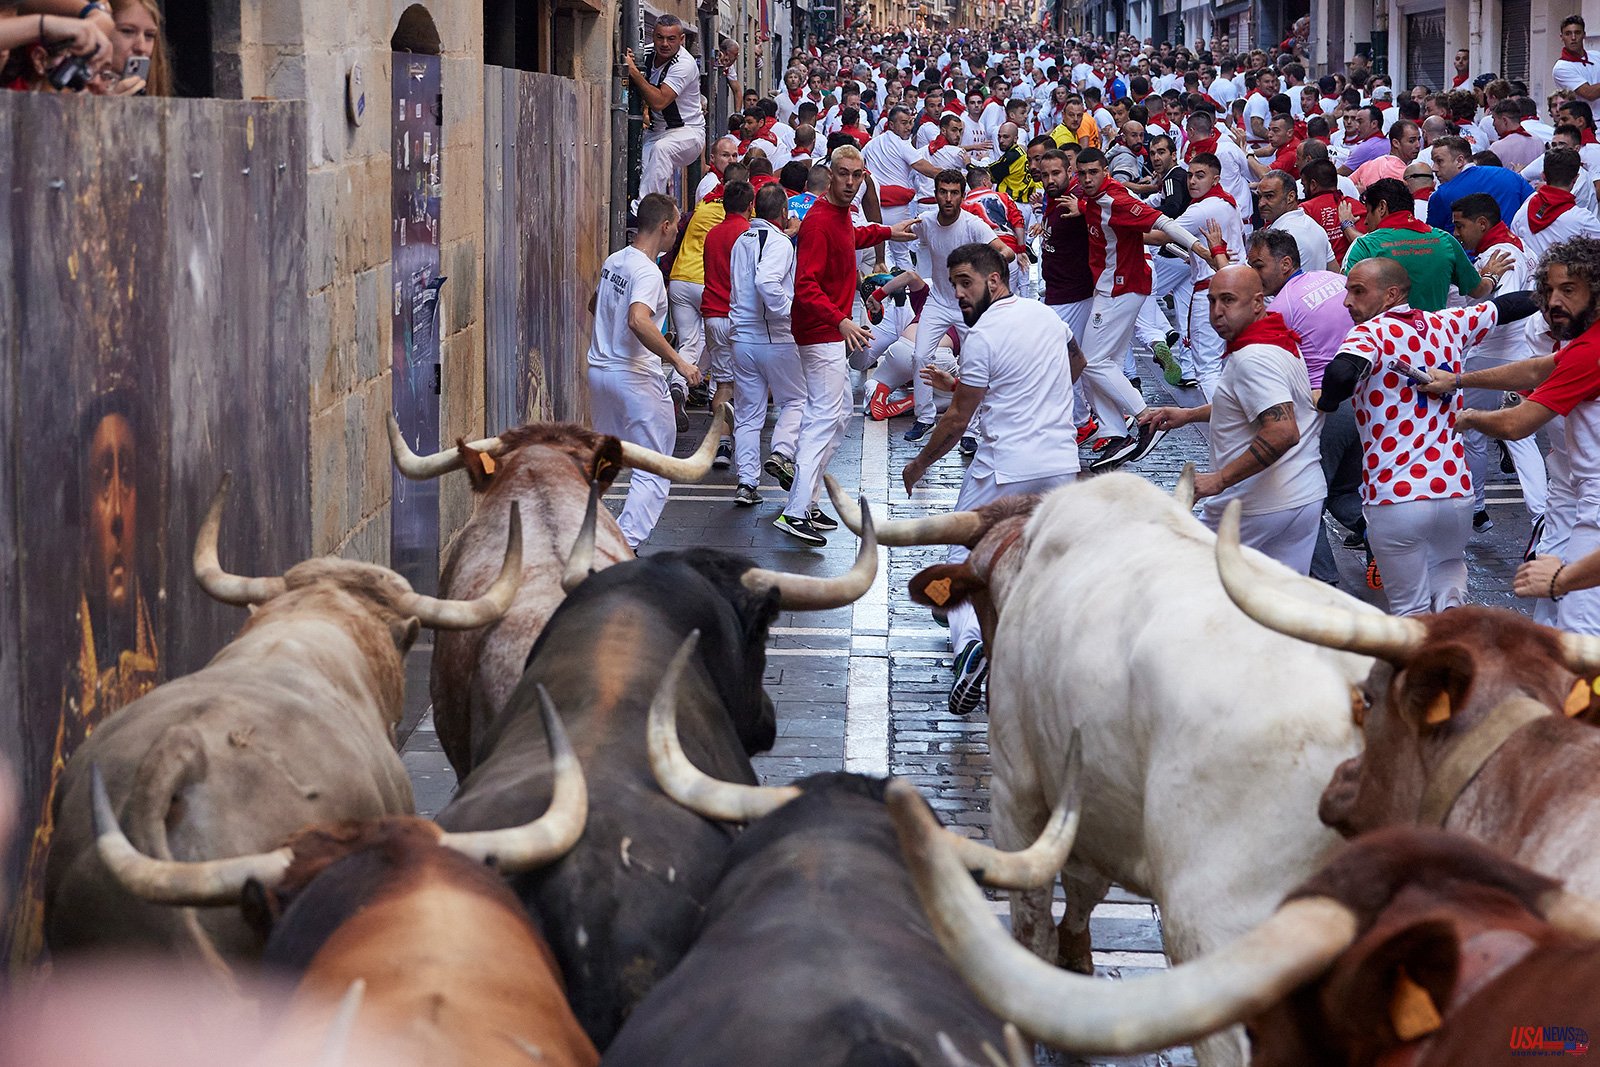 Six people are injured in controversial bull run that returns to Spain's Pamplona